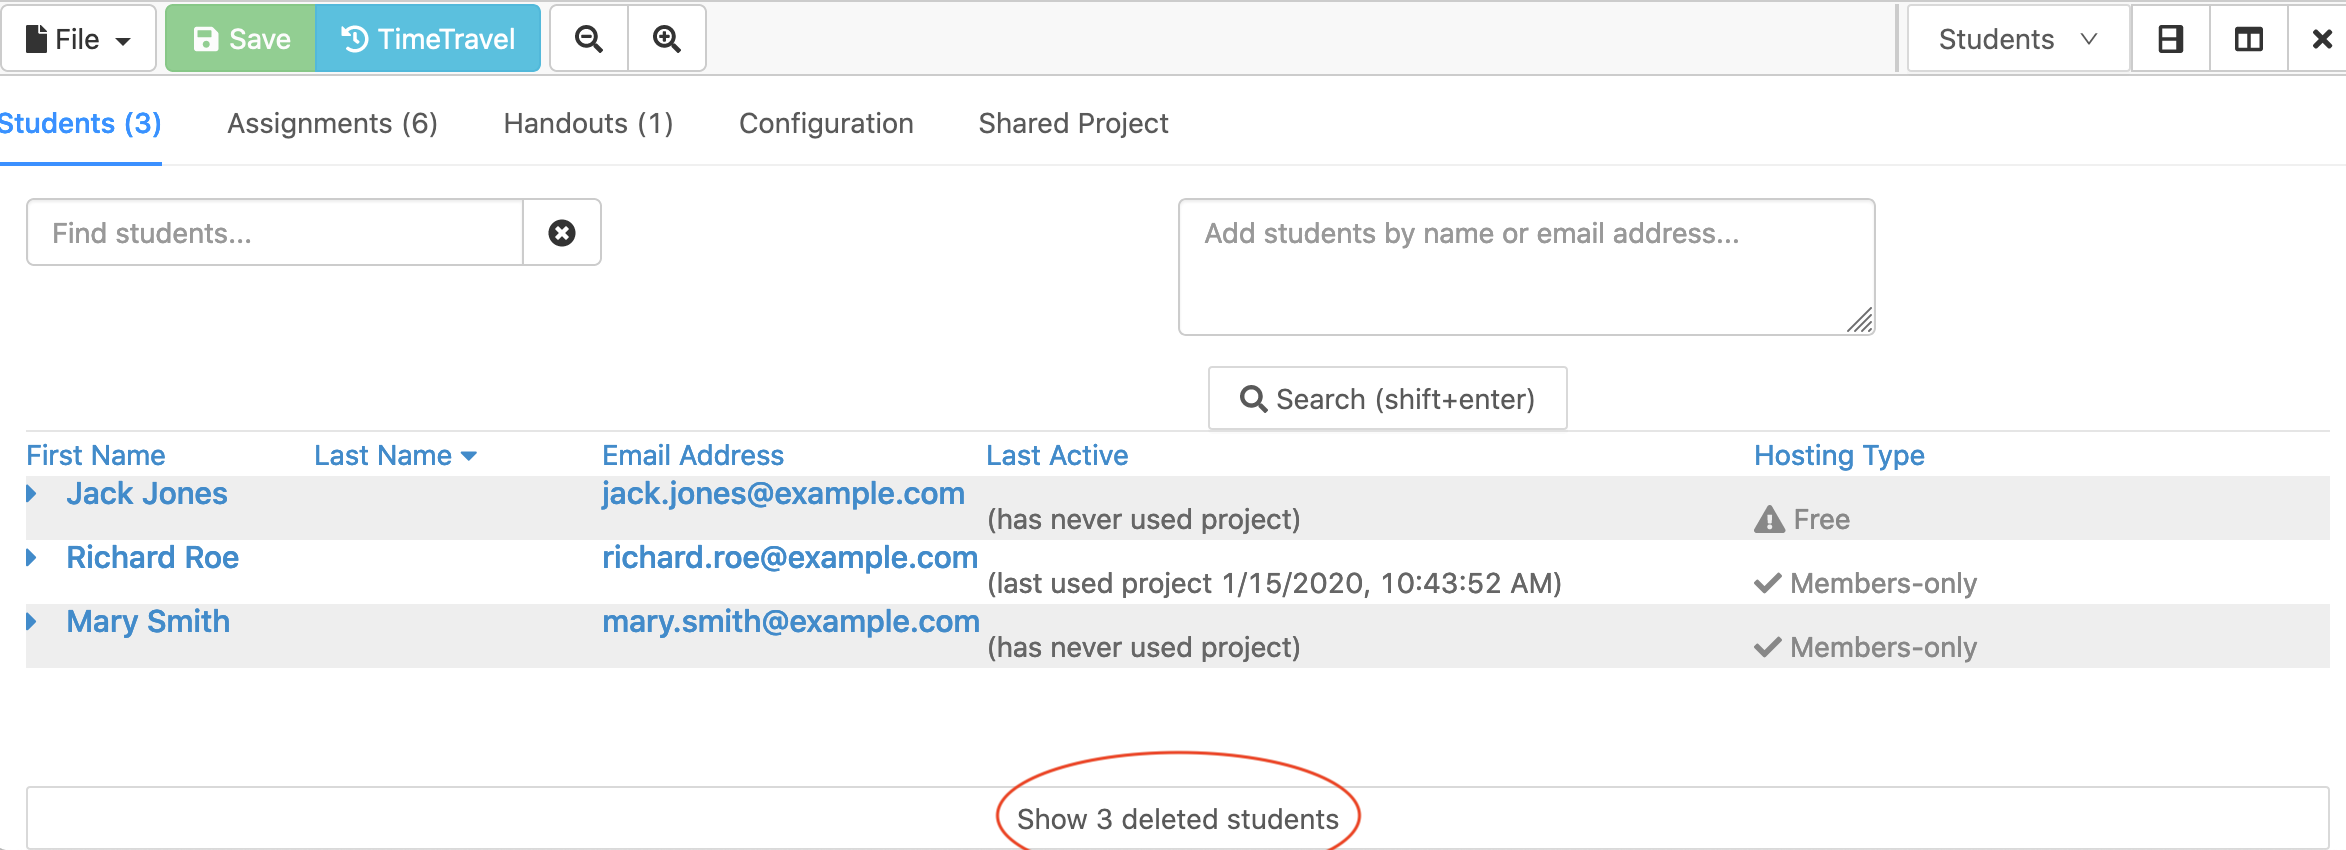 Button to show deleted students is at very bottom of student list